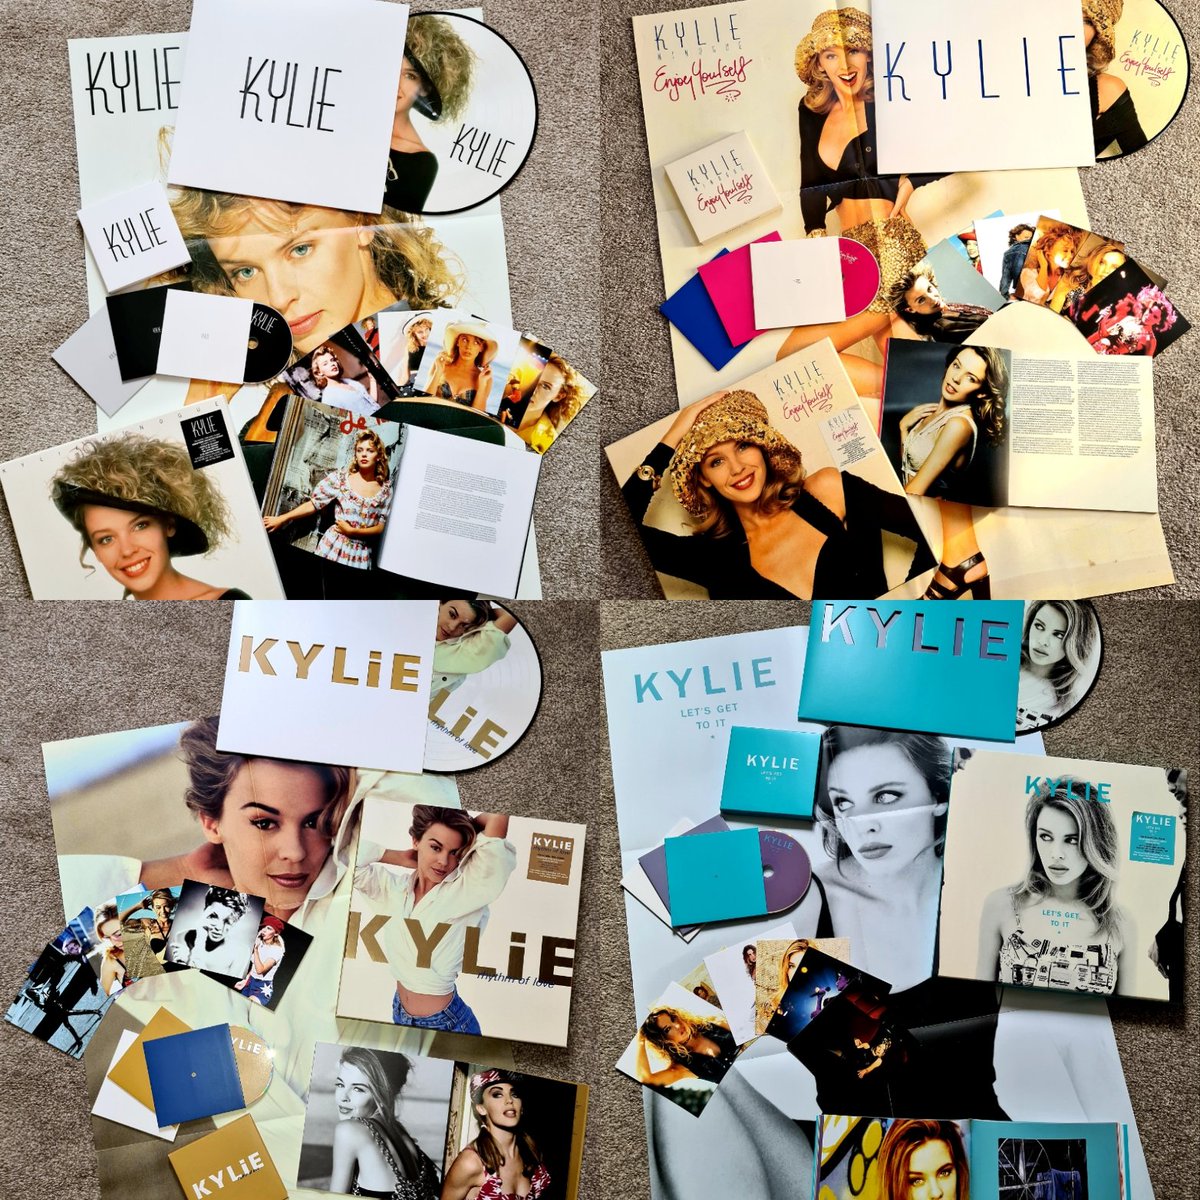 All 4 @kylieminogue #pwl #cherryredrecords deluxe boxsets in all their glory 😍. Certainly amongst my favourite kylie items in my collection. #luckyluckylucky @PWLHitFactory @mikestockmusic @MIKE_STOCK_HQ #stockaitkenwaterman